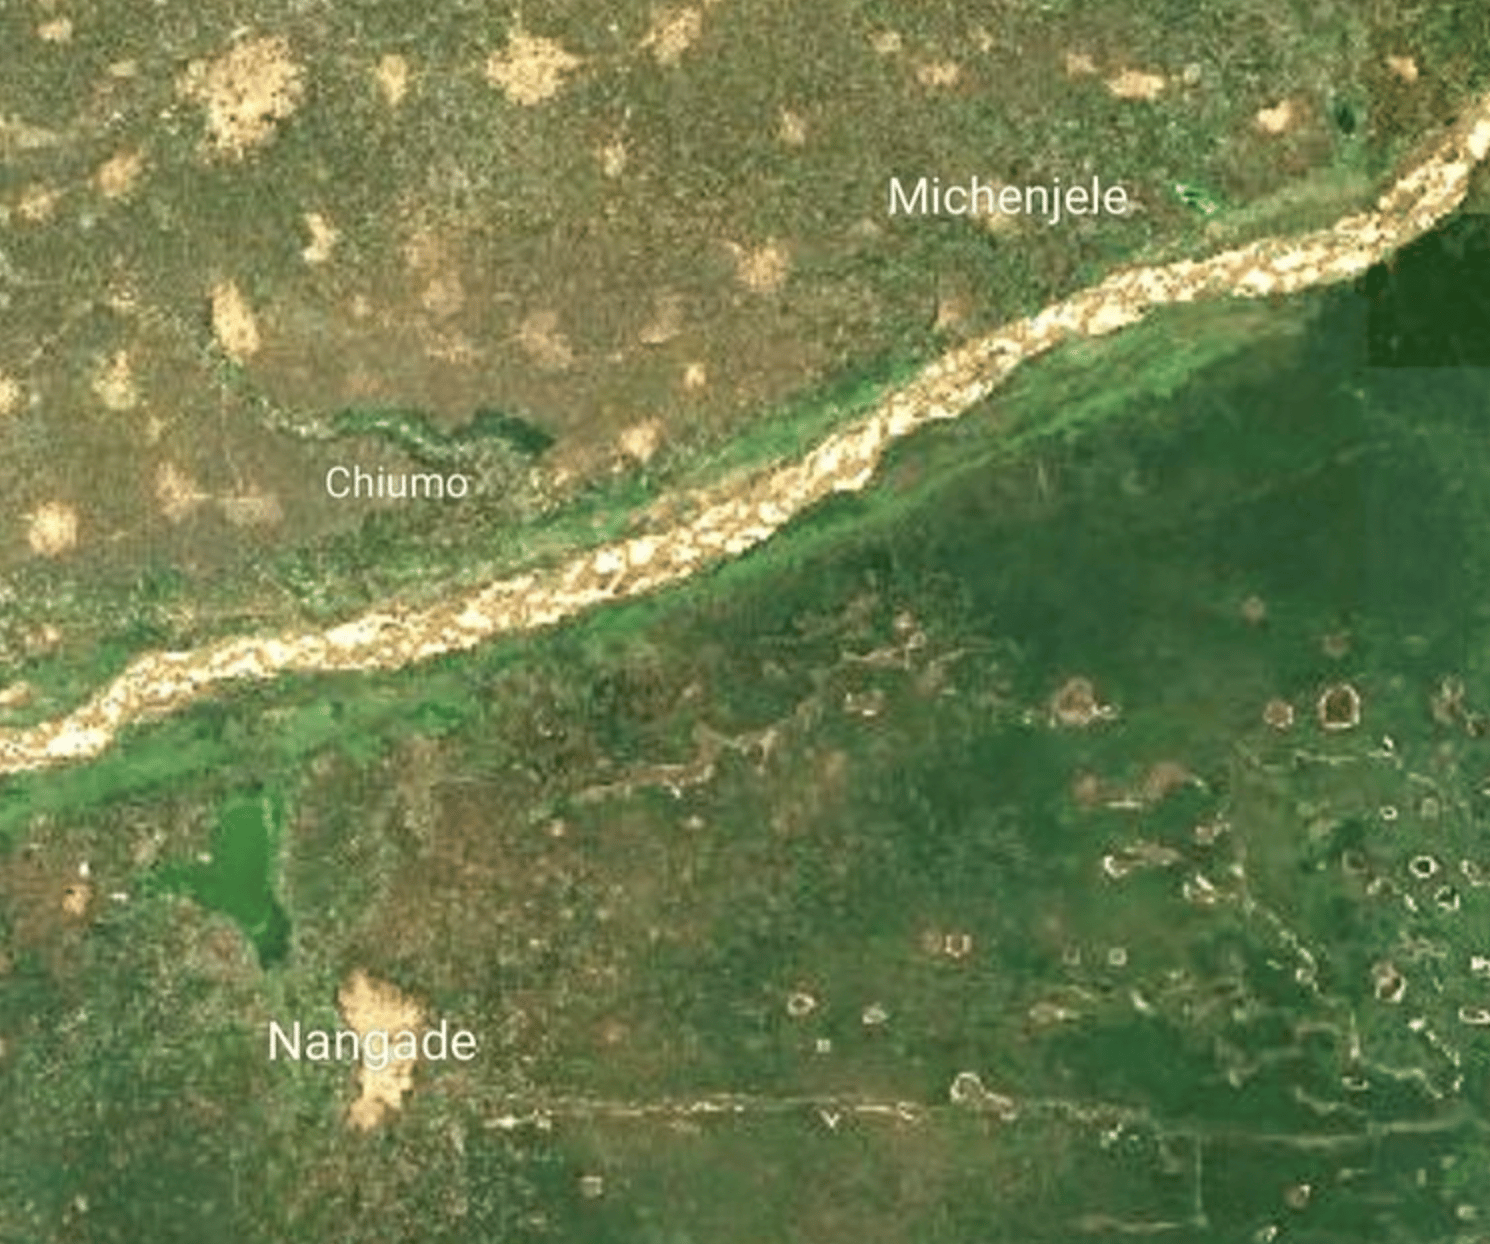 Islamic State Central Africa (ISCA) Assault The Village of Michenjele, Killing Four, in Mtwara, Tanzania